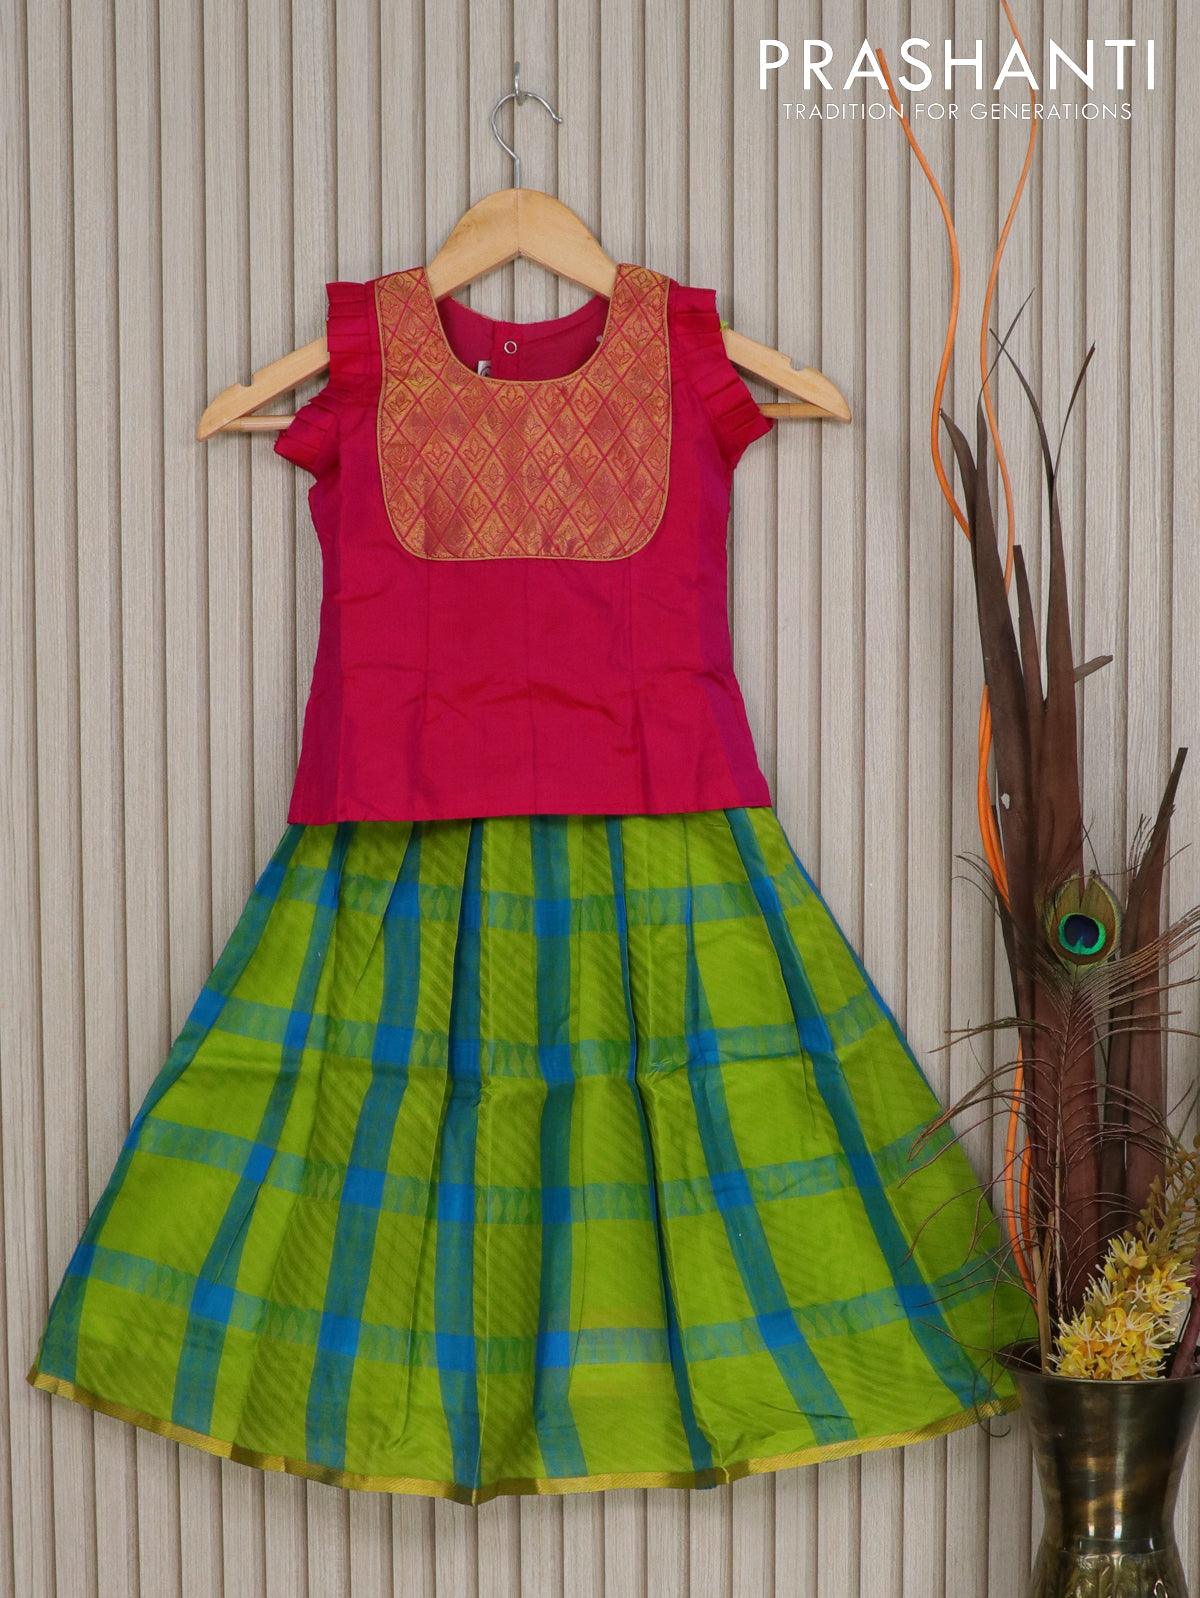 silk kids lehenga pink and light green with patch work neck pattern and piping zari woven border for 4 years prashanti